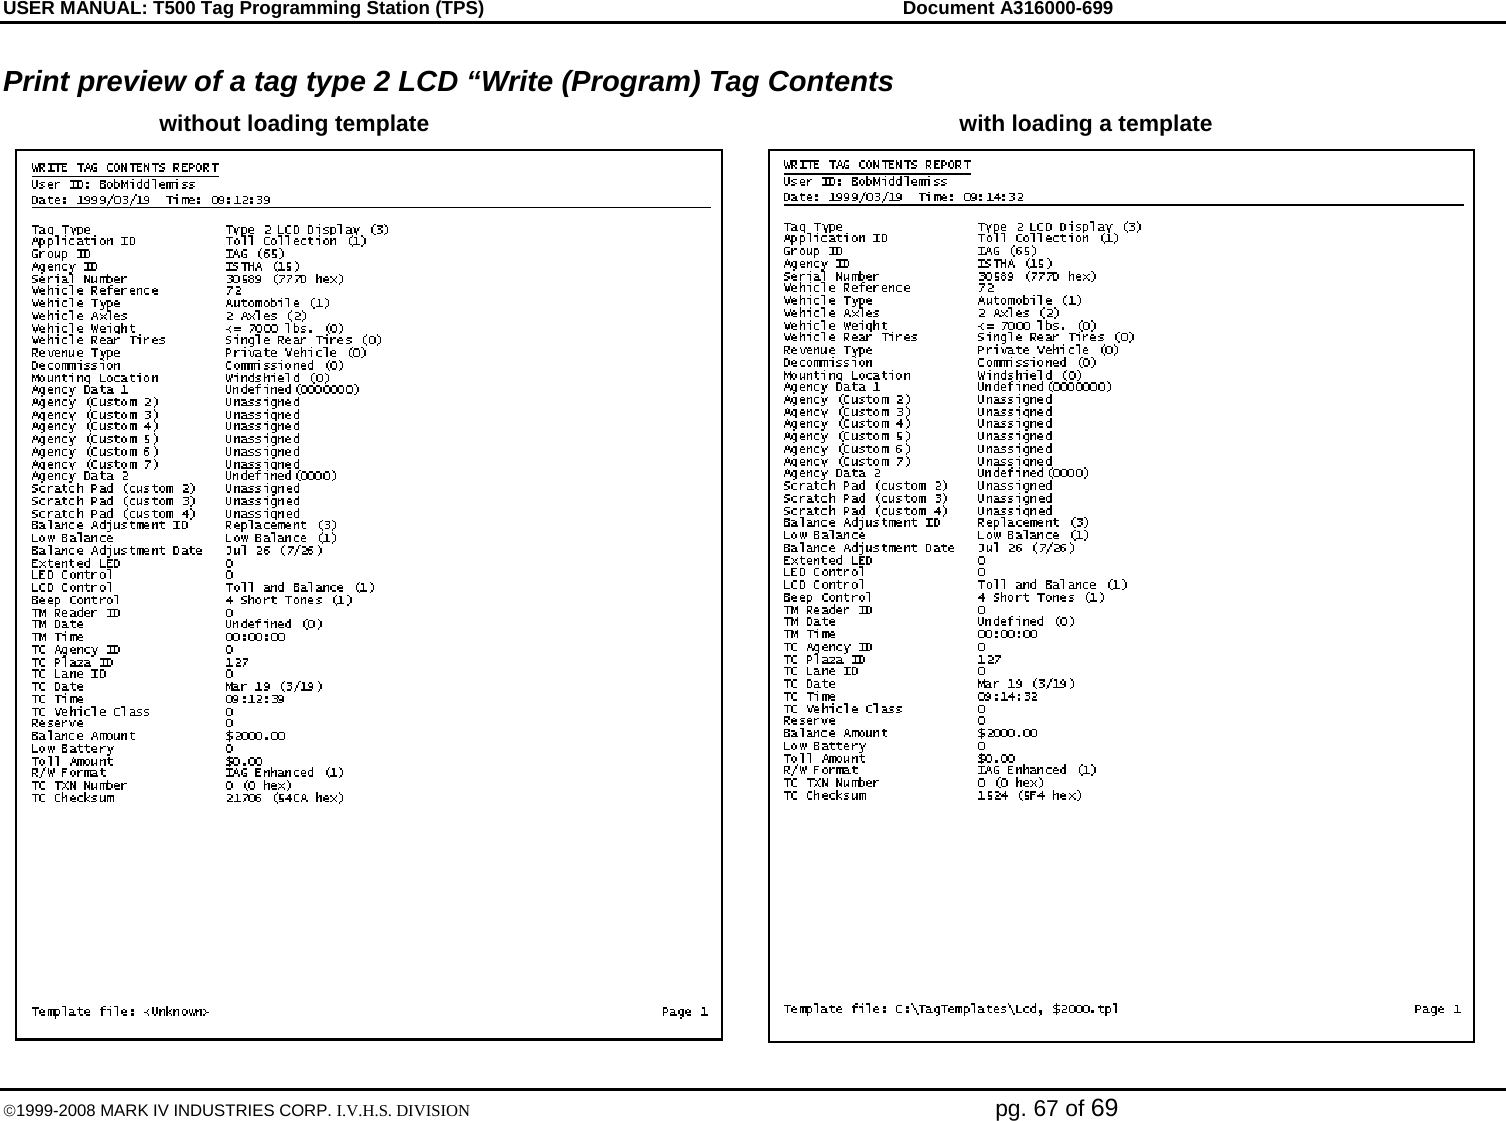 USER MANUAL: T500 Tag Programming Station (TPS)     Document A316000-699  ©1999-2008 MARK IV INDUSTRIES CORP. I.V.H.S. DIVISION   pg. 67 of 69 Print preview of a tag type 2 LCD “Write (Program) Tag Contents    without loading template  with loading a template  